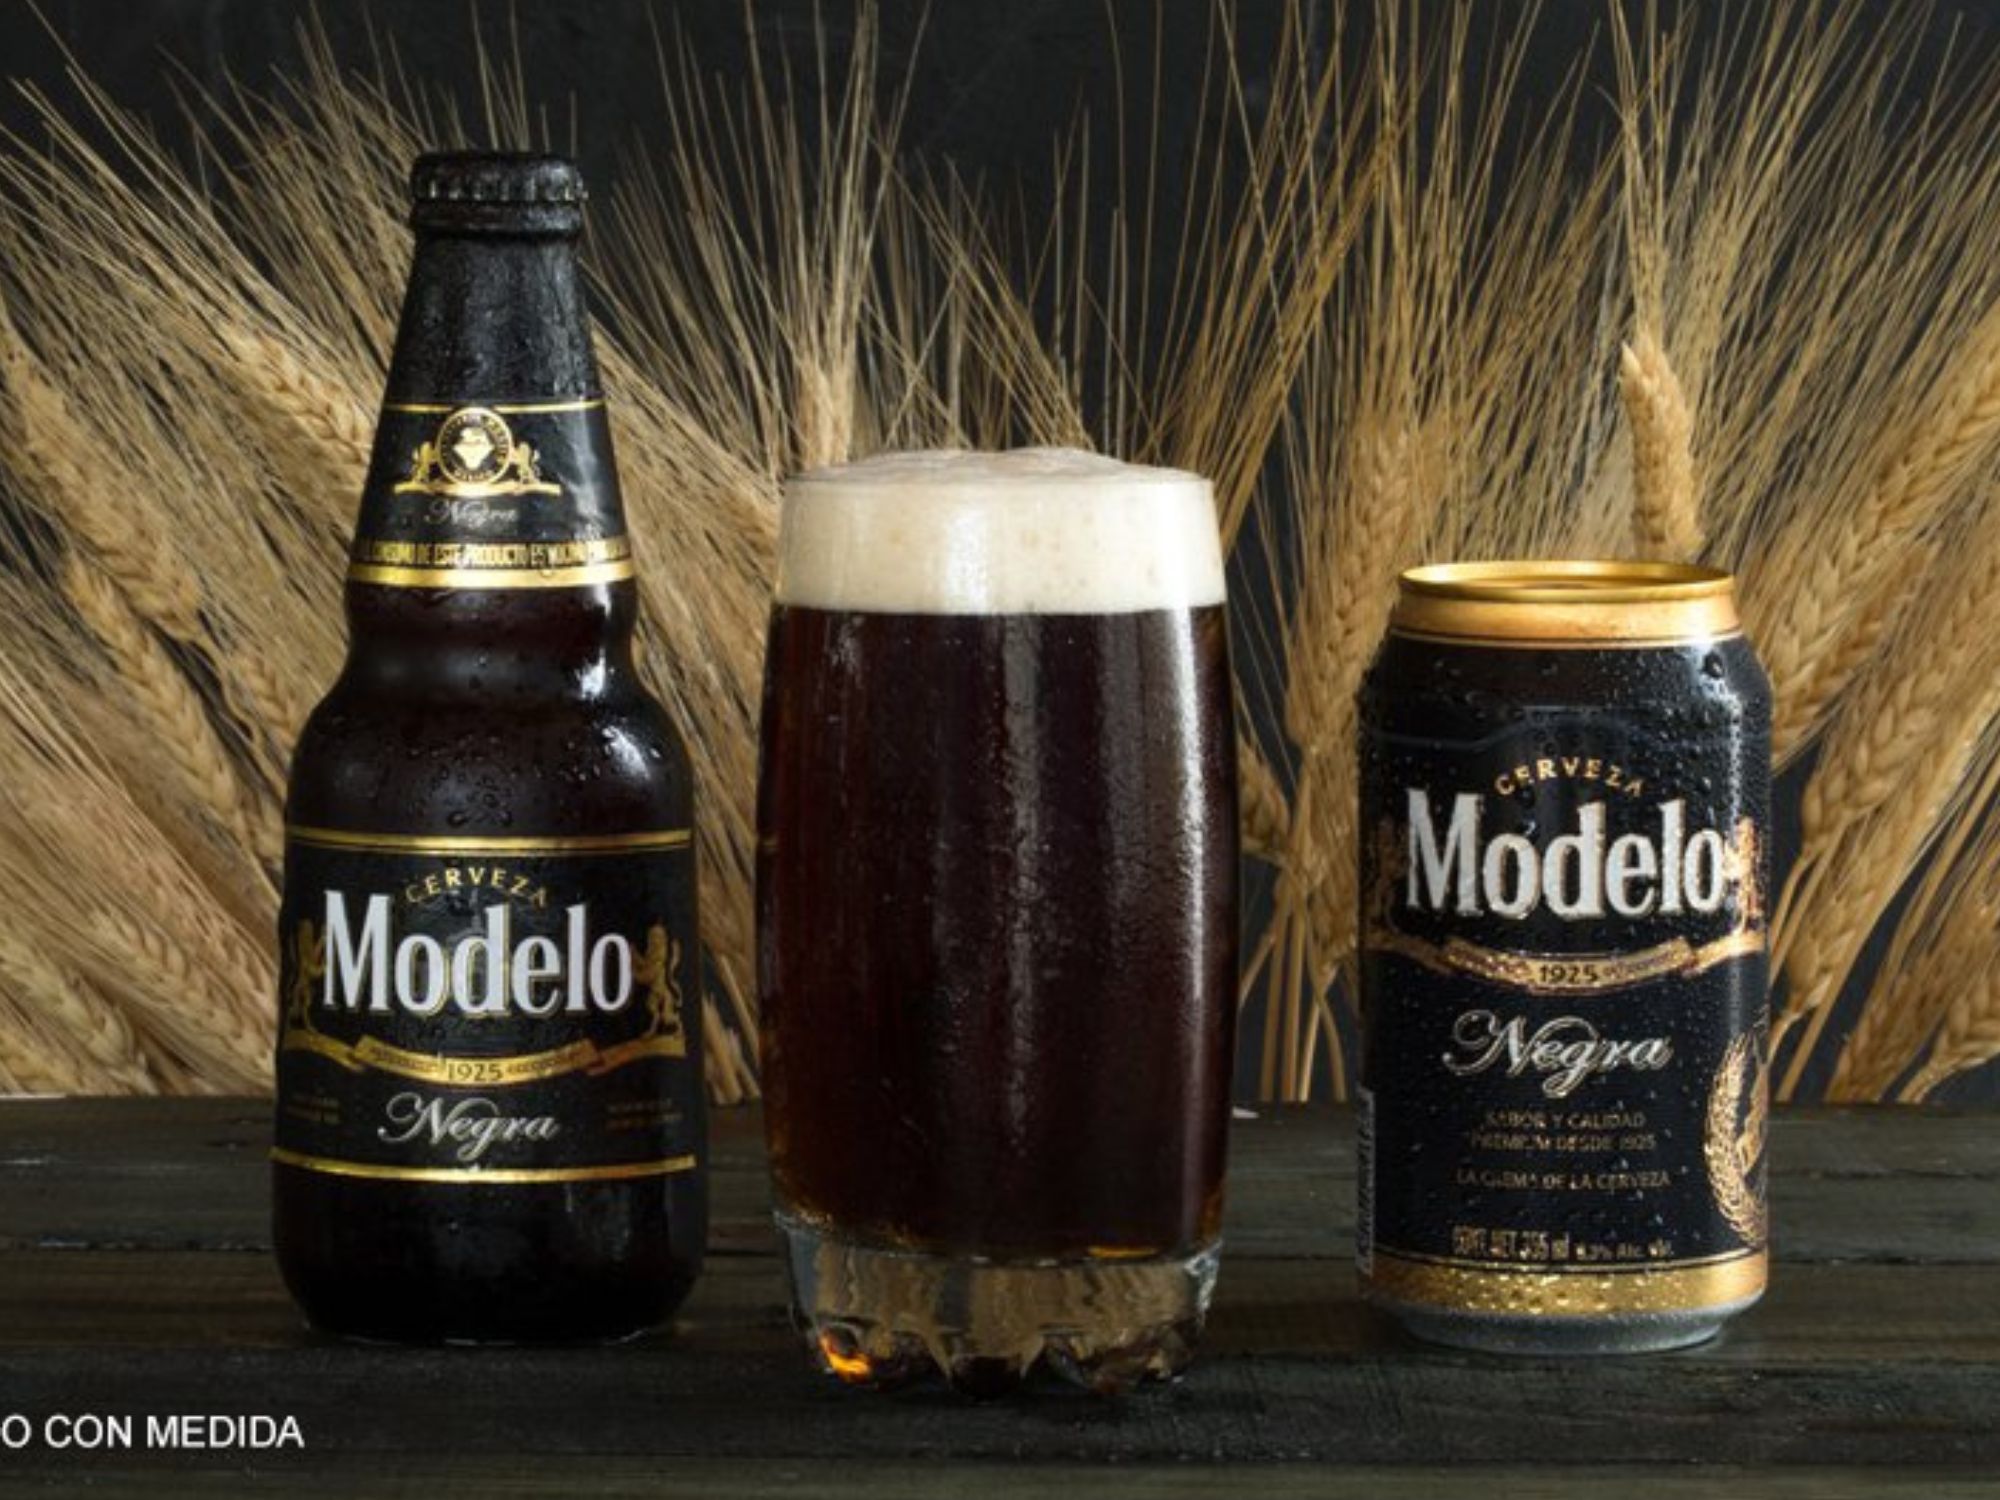 The Complete Modelo Negra Beer Review